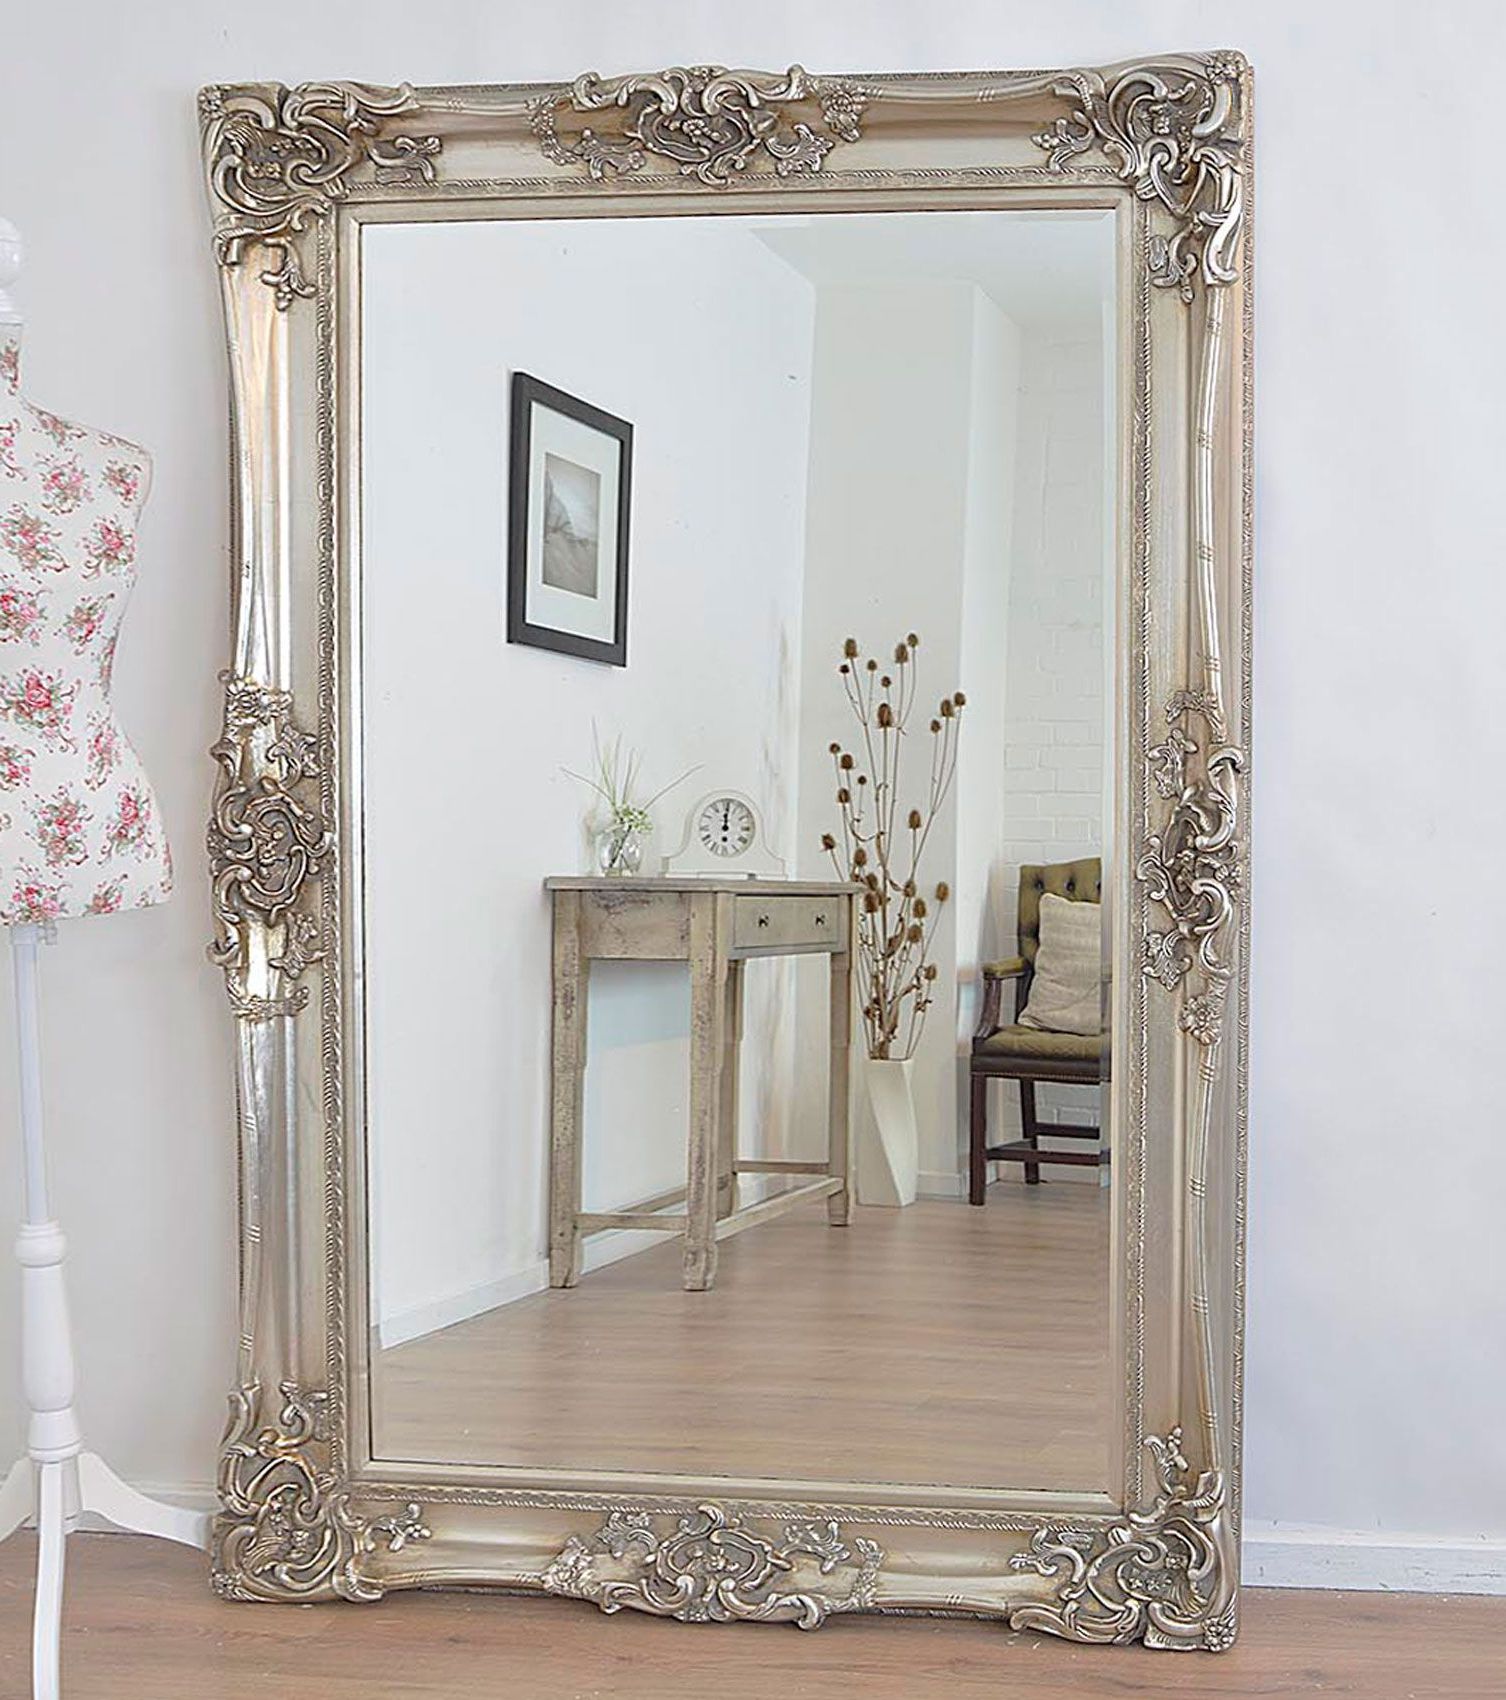 Antique Design Ornate Wall Mirror Will Make A Beautiful Addition To Any With Recent High Wall Mirrors (View 6 of 15)